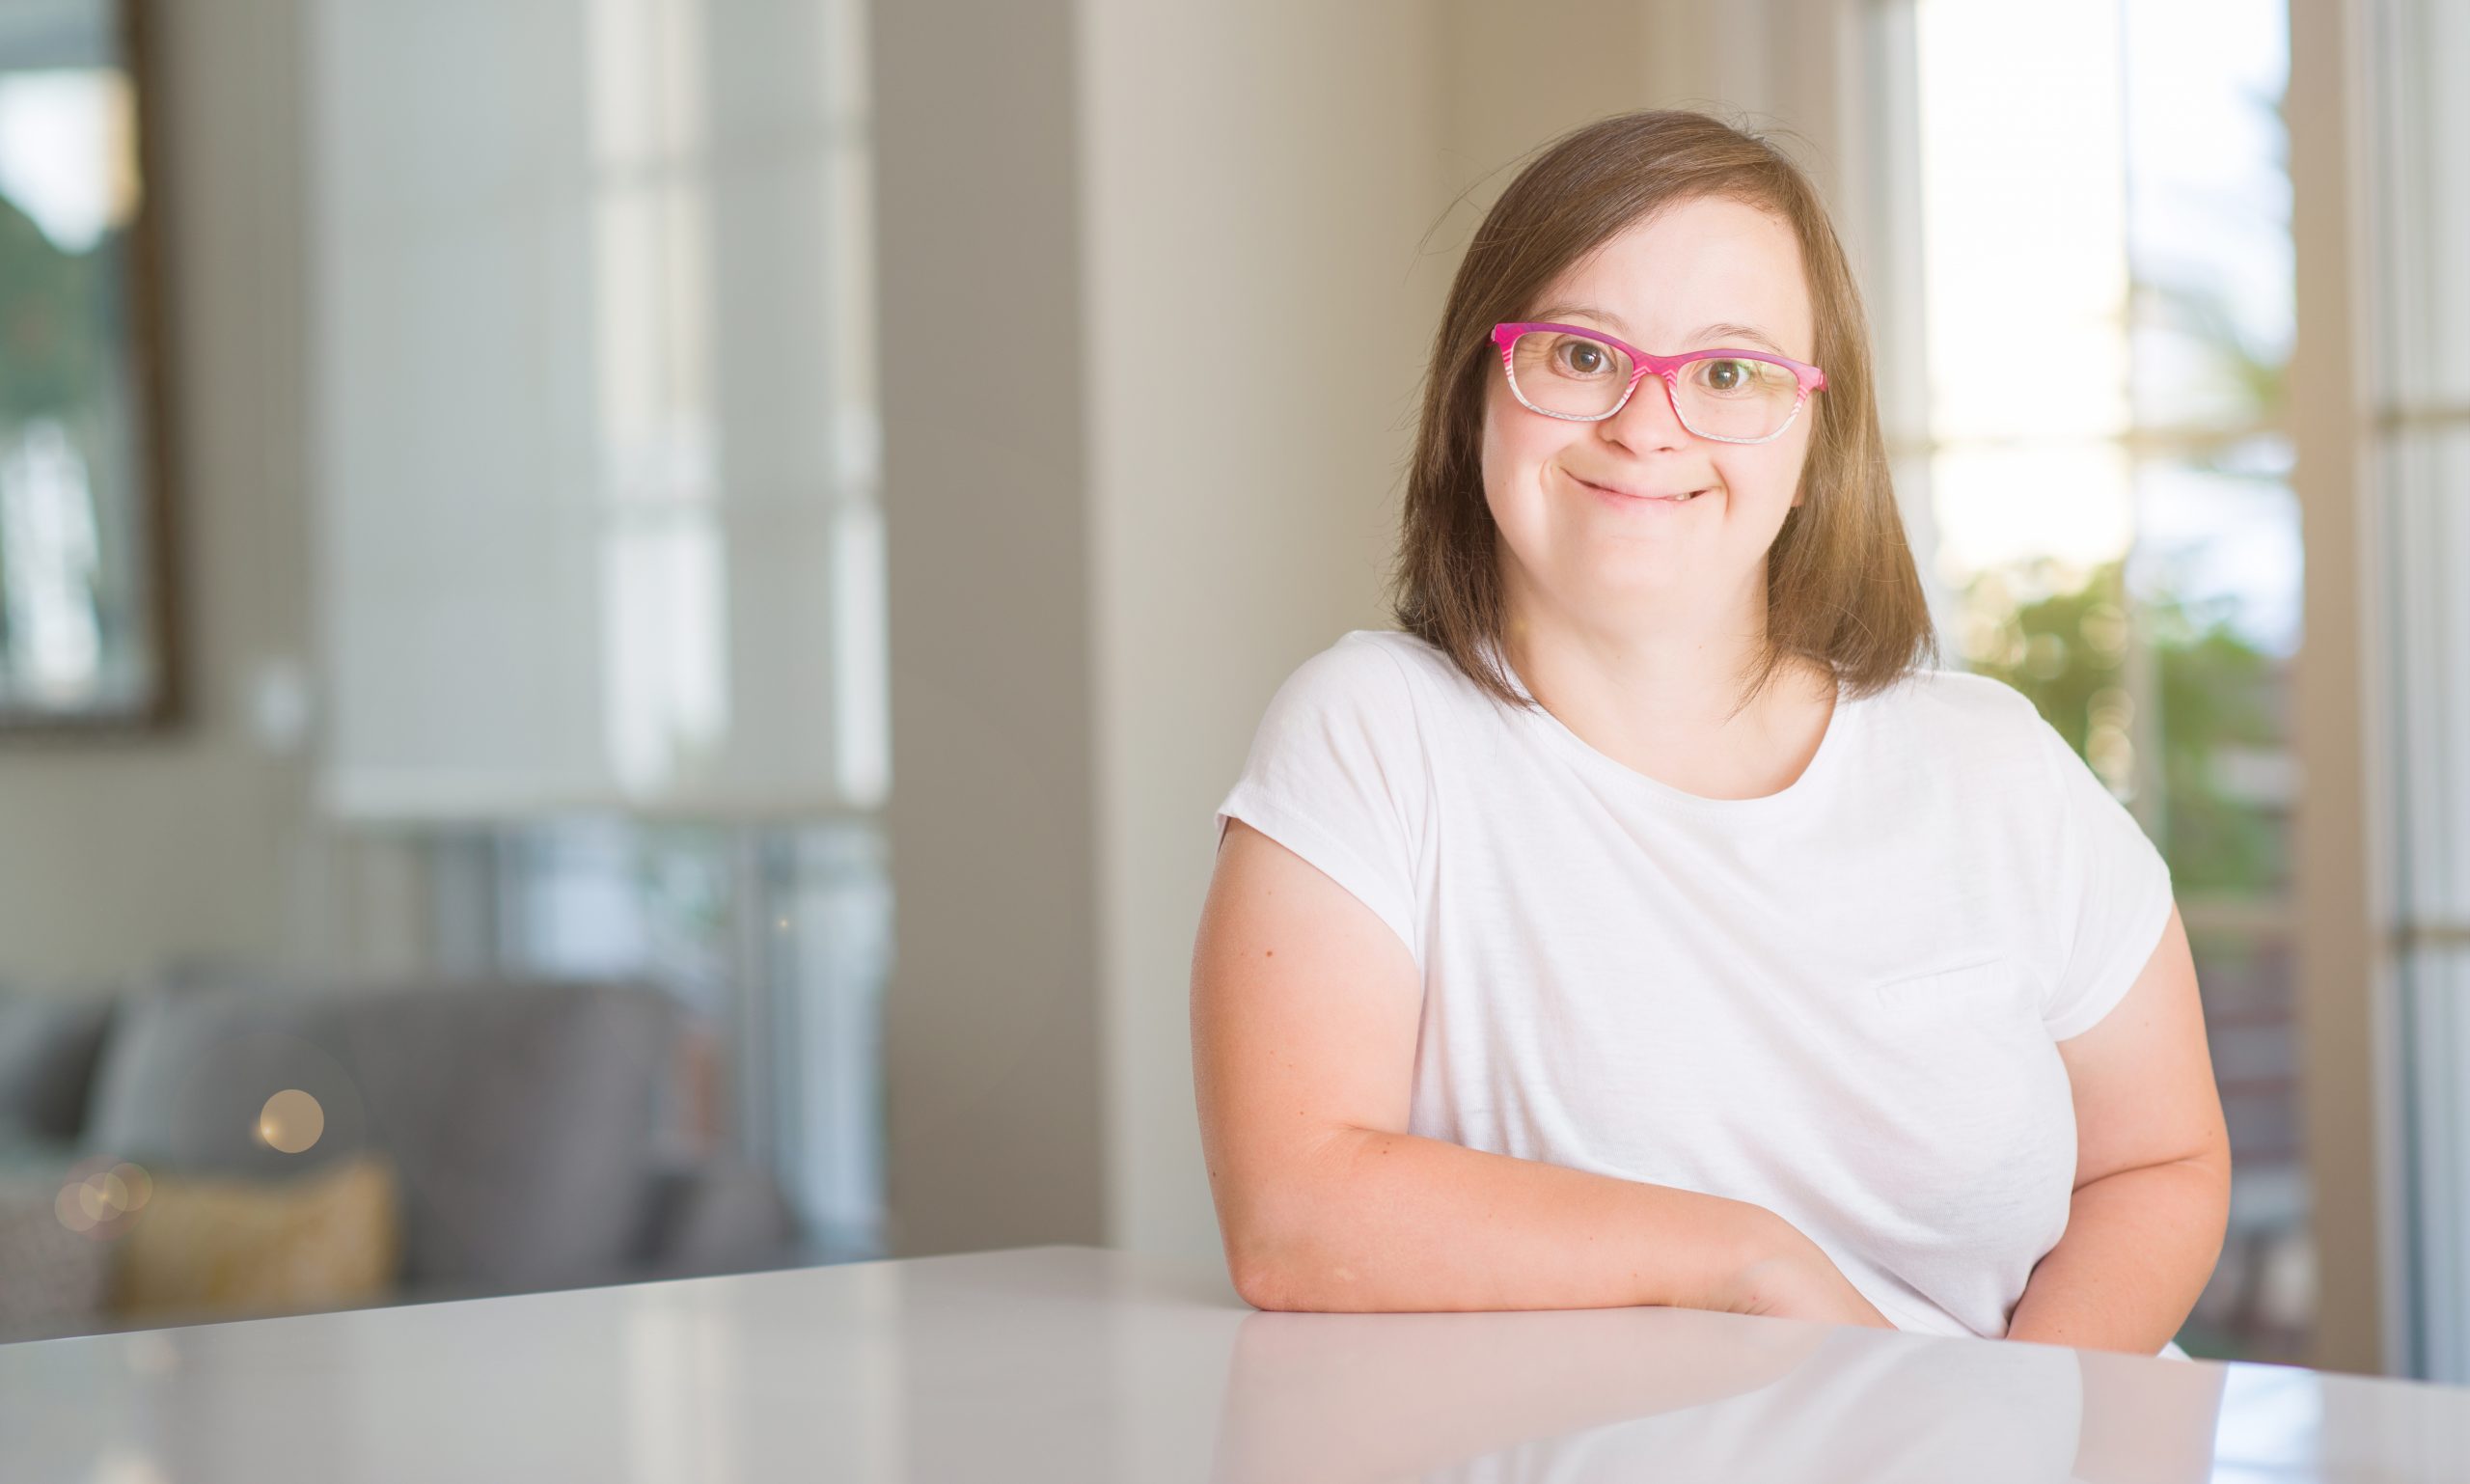 Smiling woman with down syndrome at home